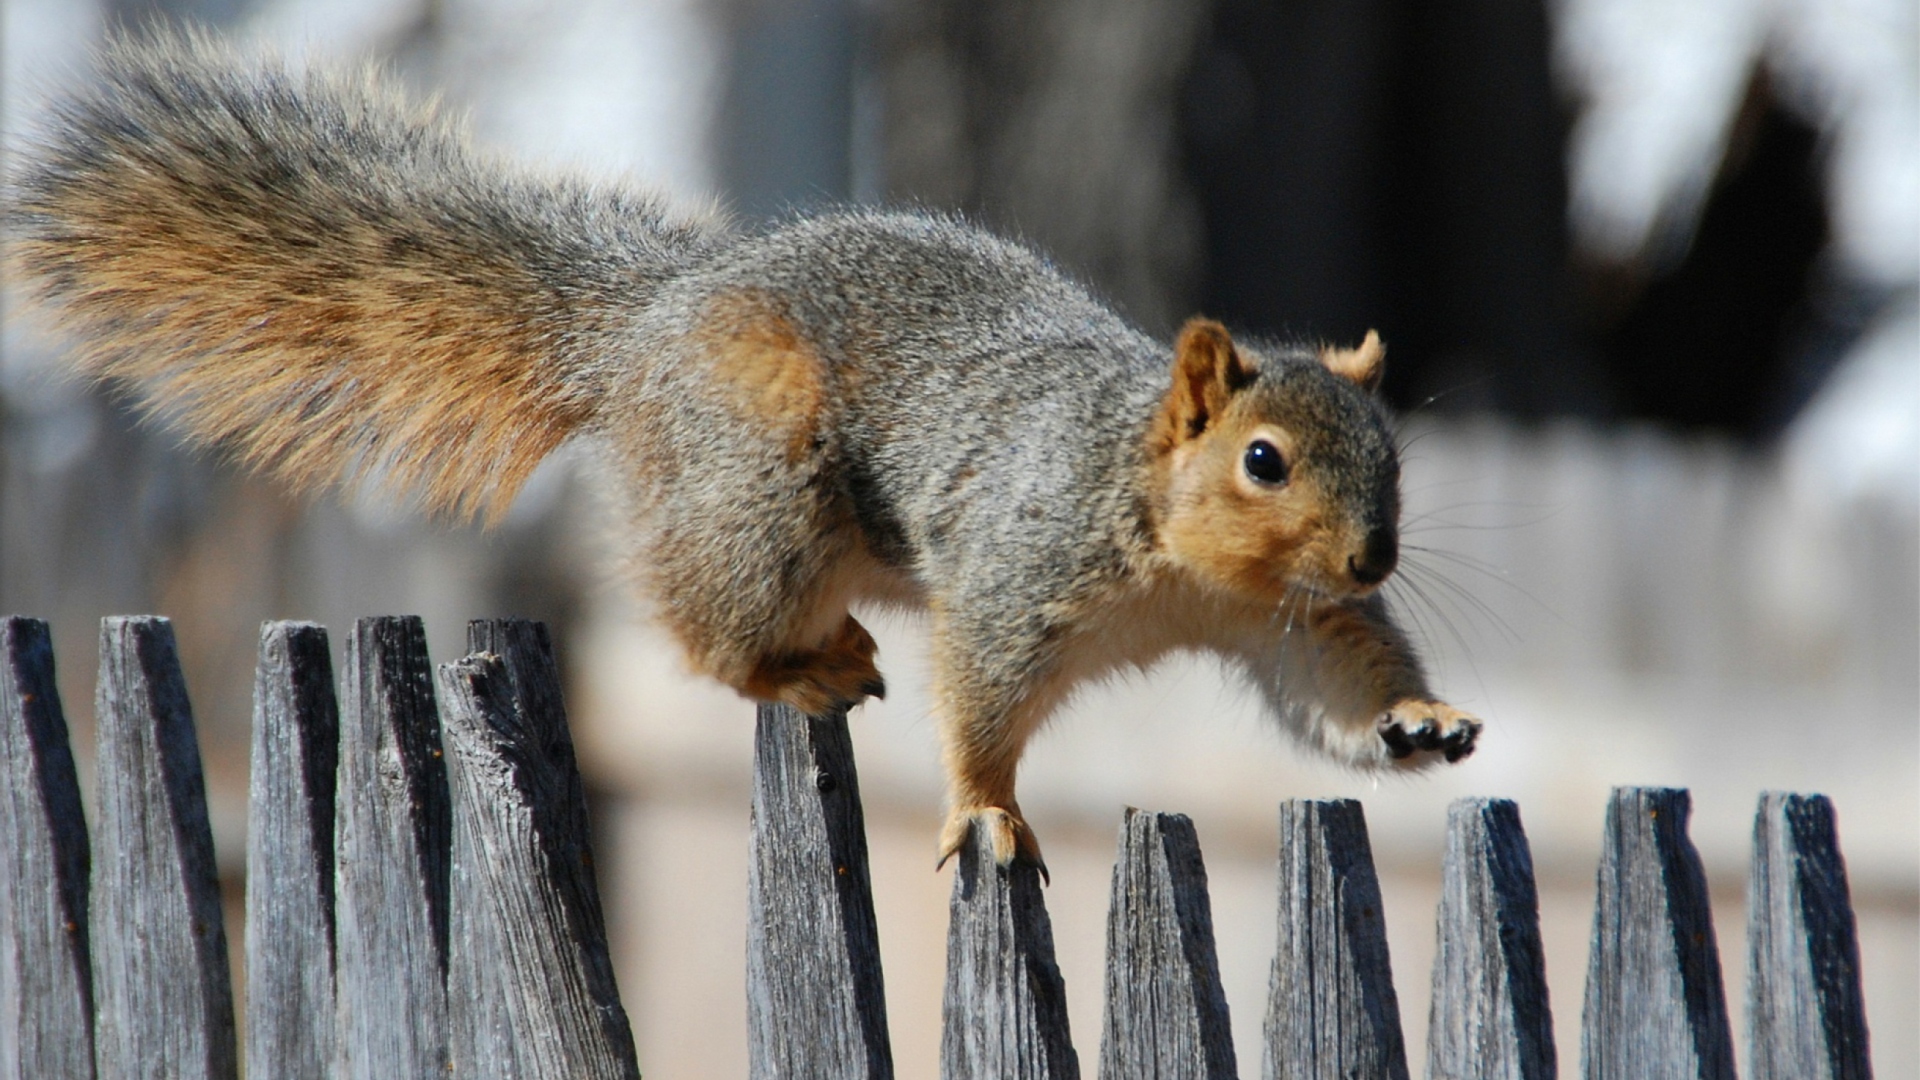 Squirrel On Fence wallpaper 1920x1080